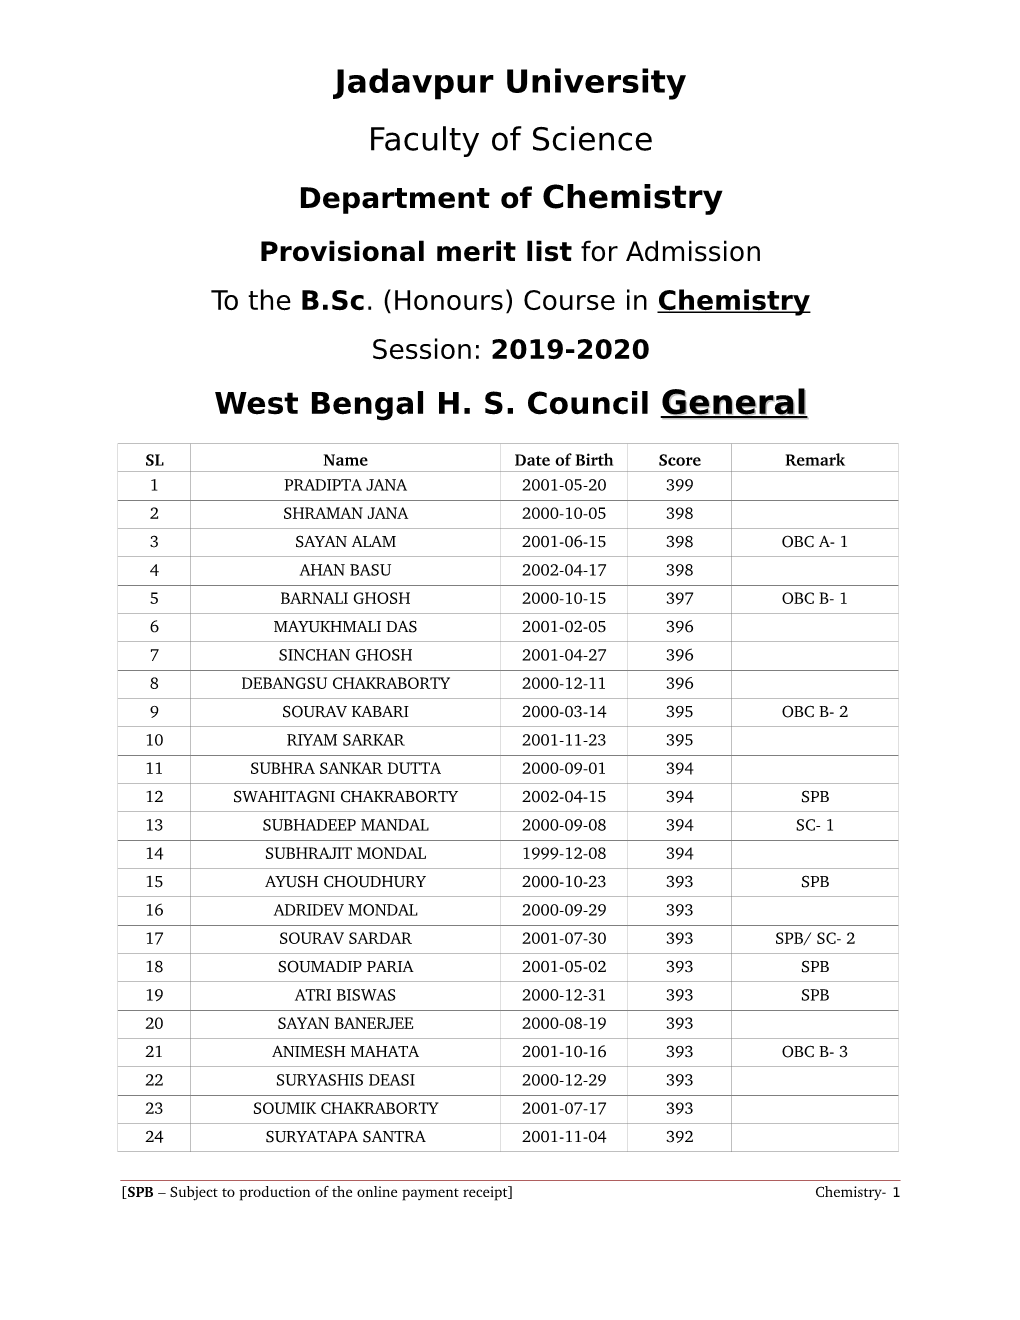 Jadavpur University Faculty of Science Department of Chemistry Provisional Merit List for Admission to the B.Sc